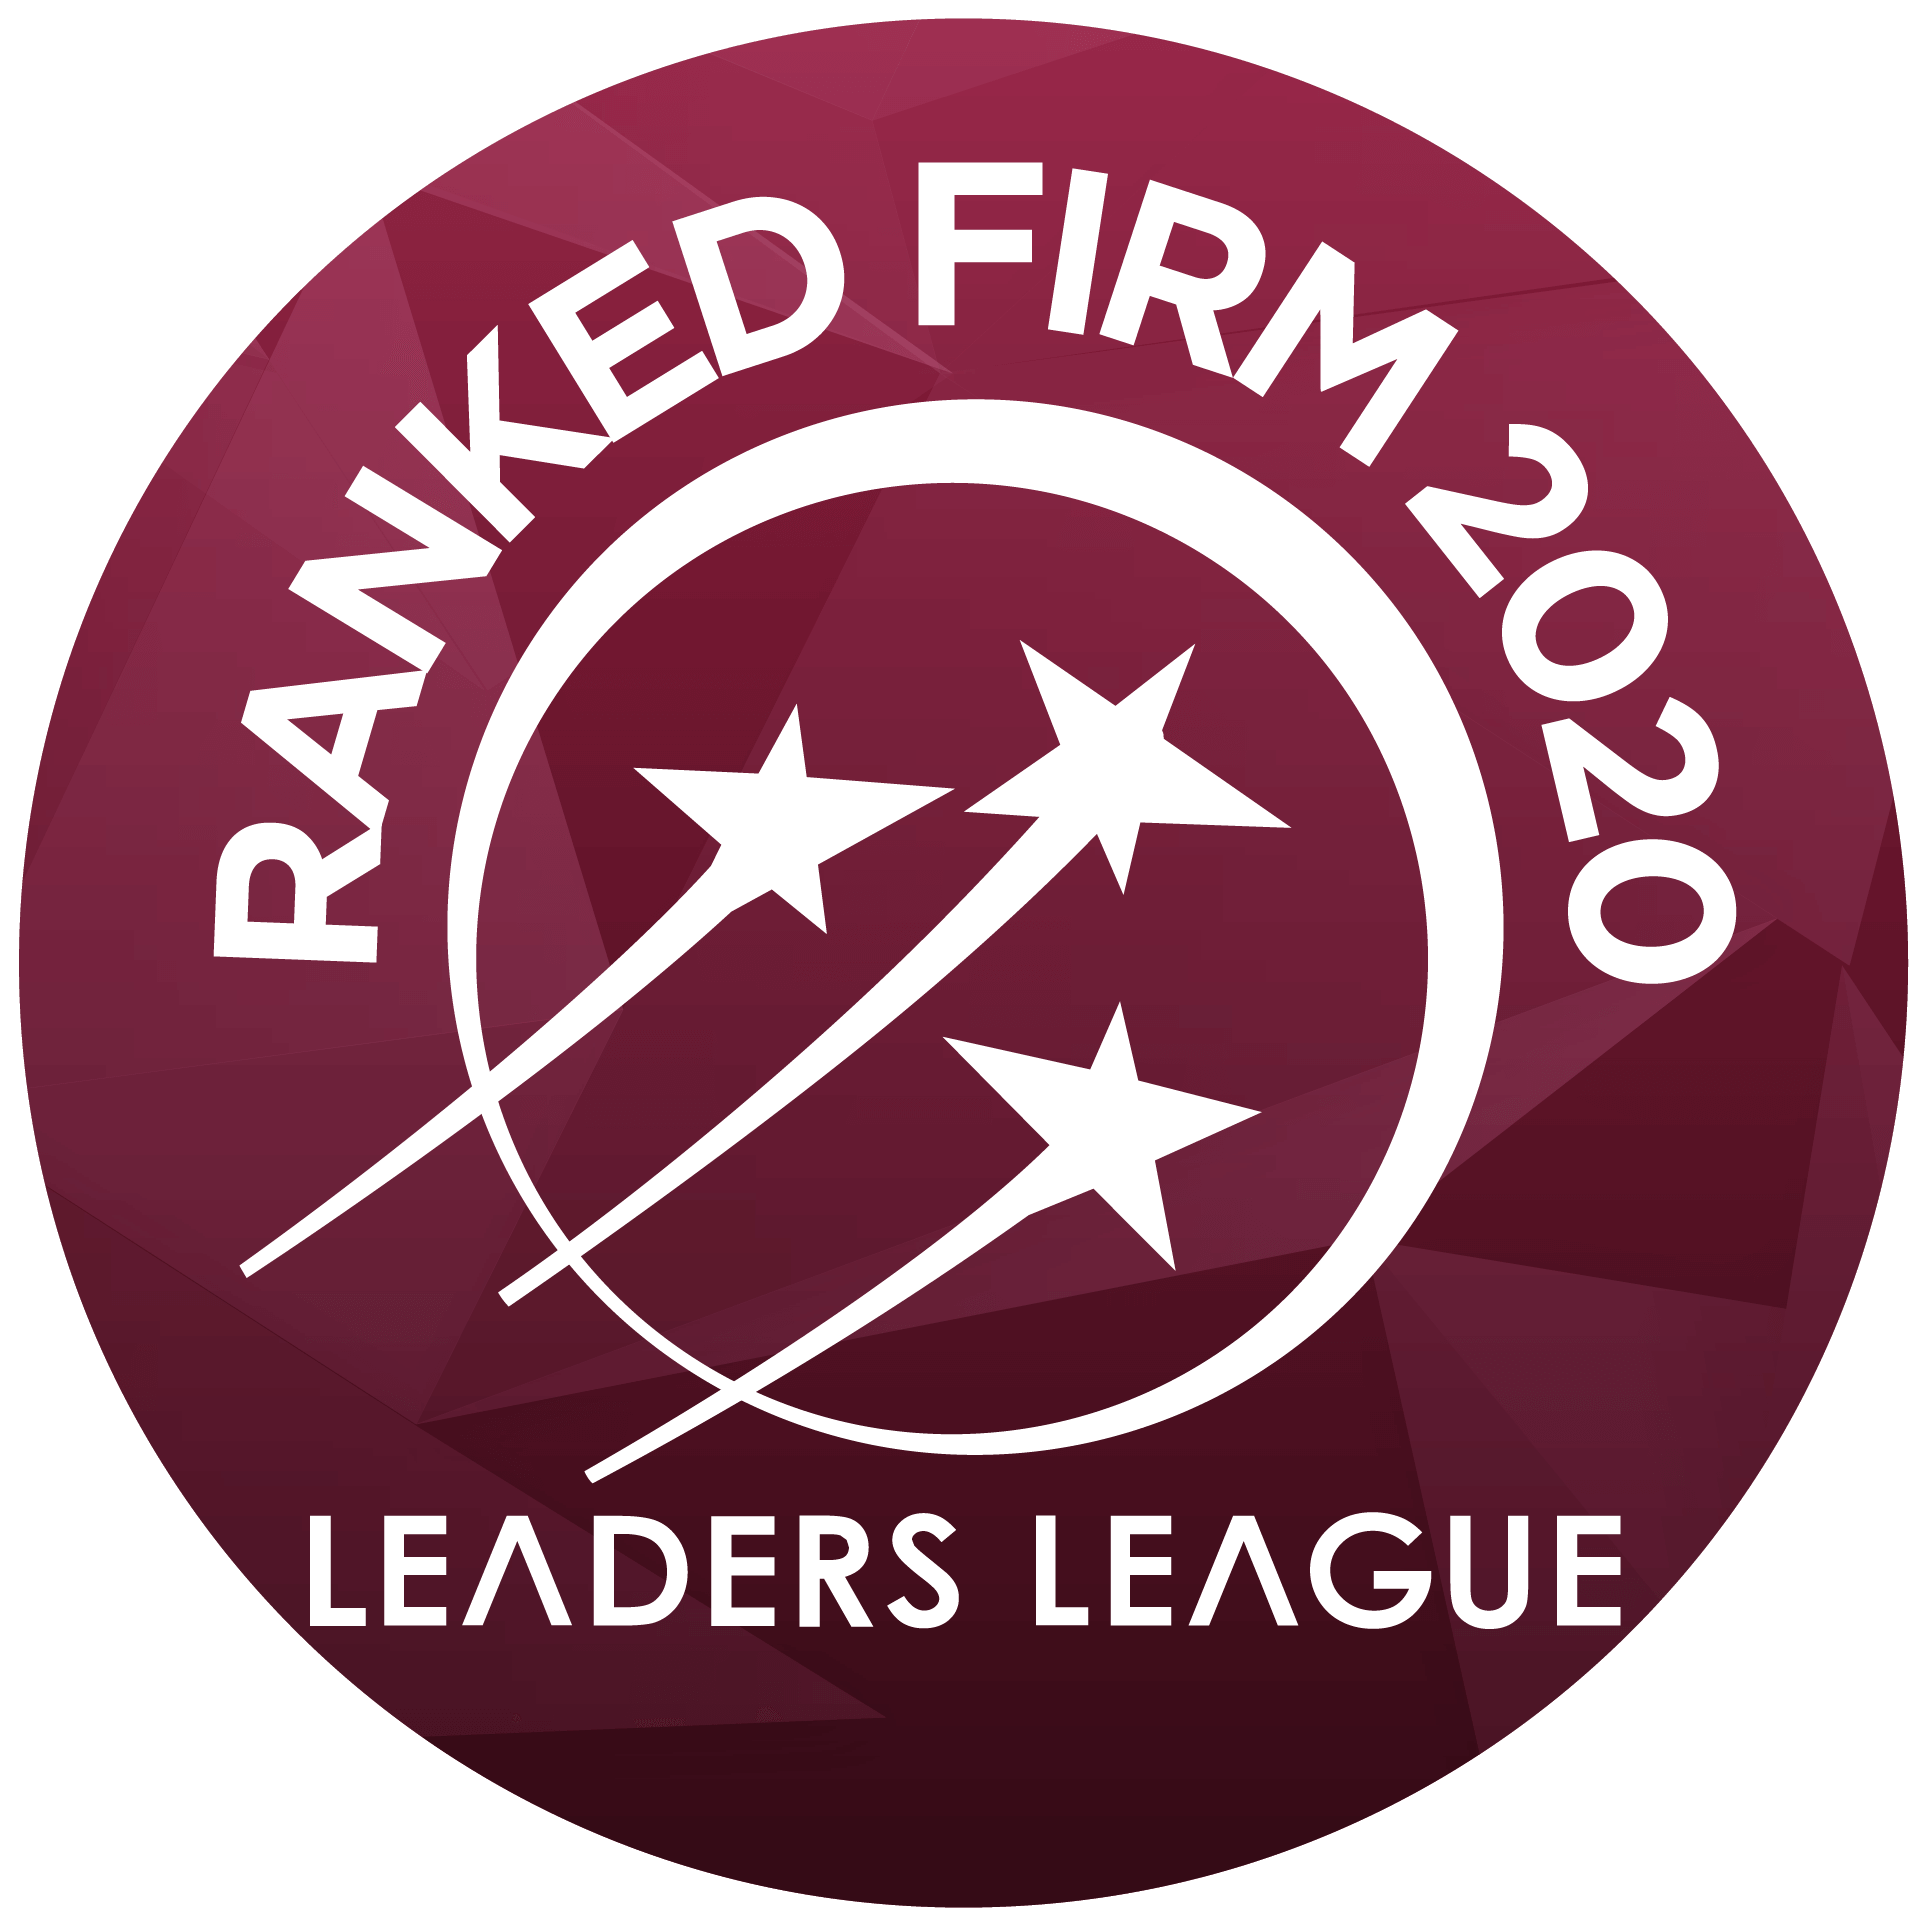 Ranked-Firm-2020-Leaders-League